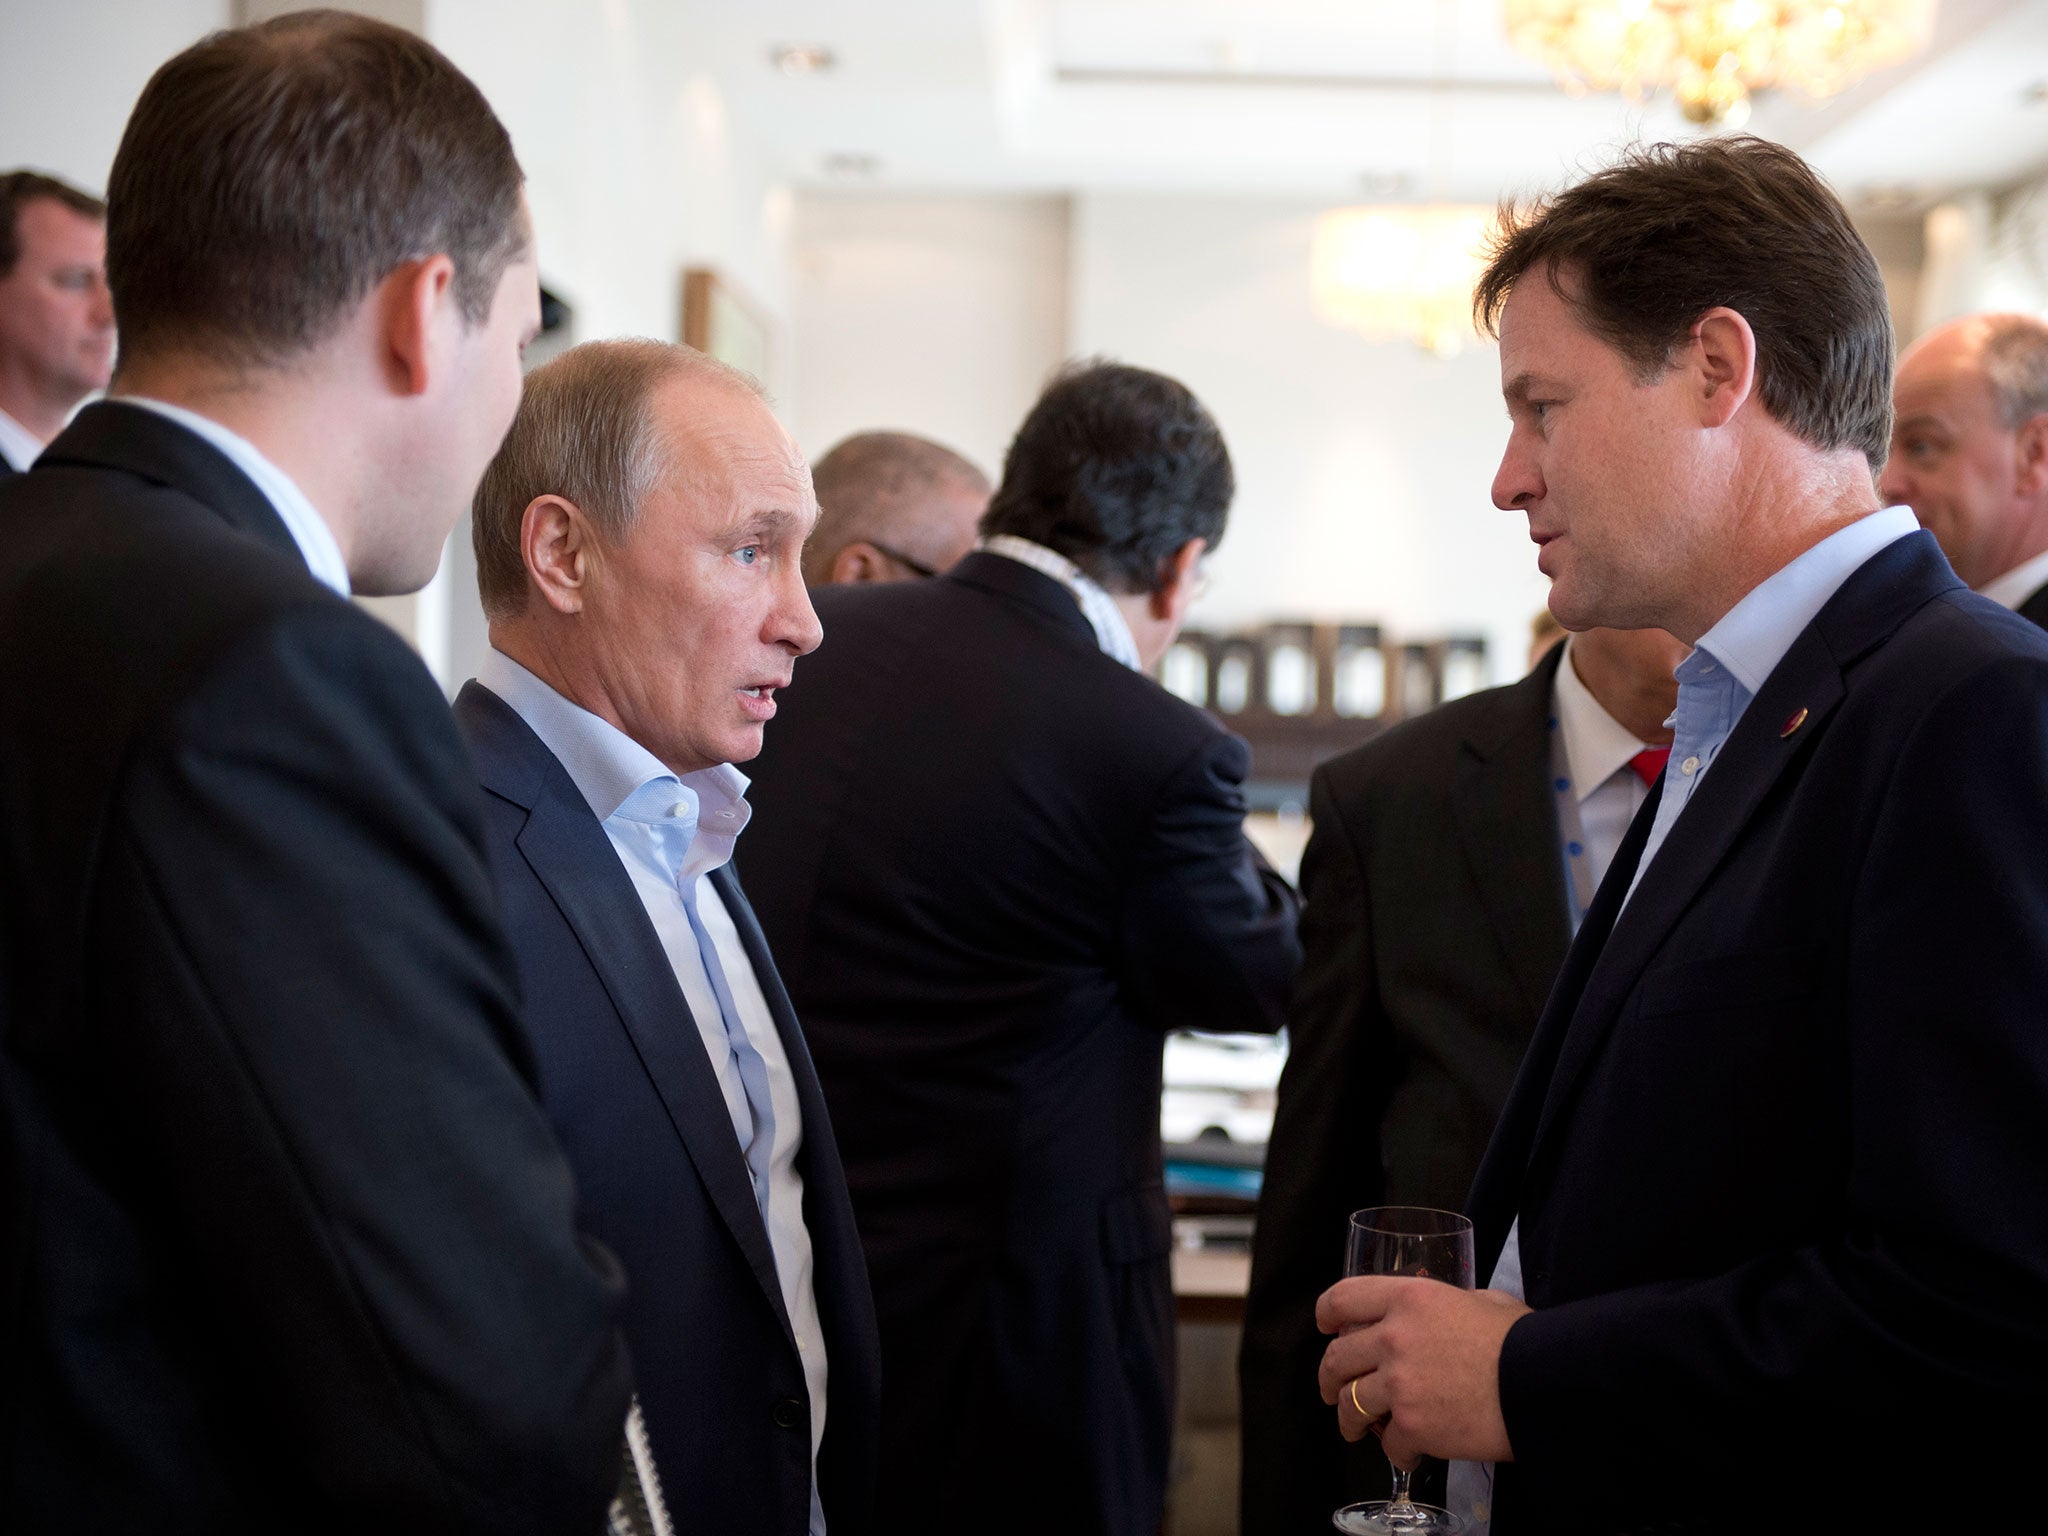 Nick Clegg talks to Russian President Vladimir Putin at the G8 Summit in Northern Ireland in 2013. The former Deputy Prime Minister has now been banned from entering Russia